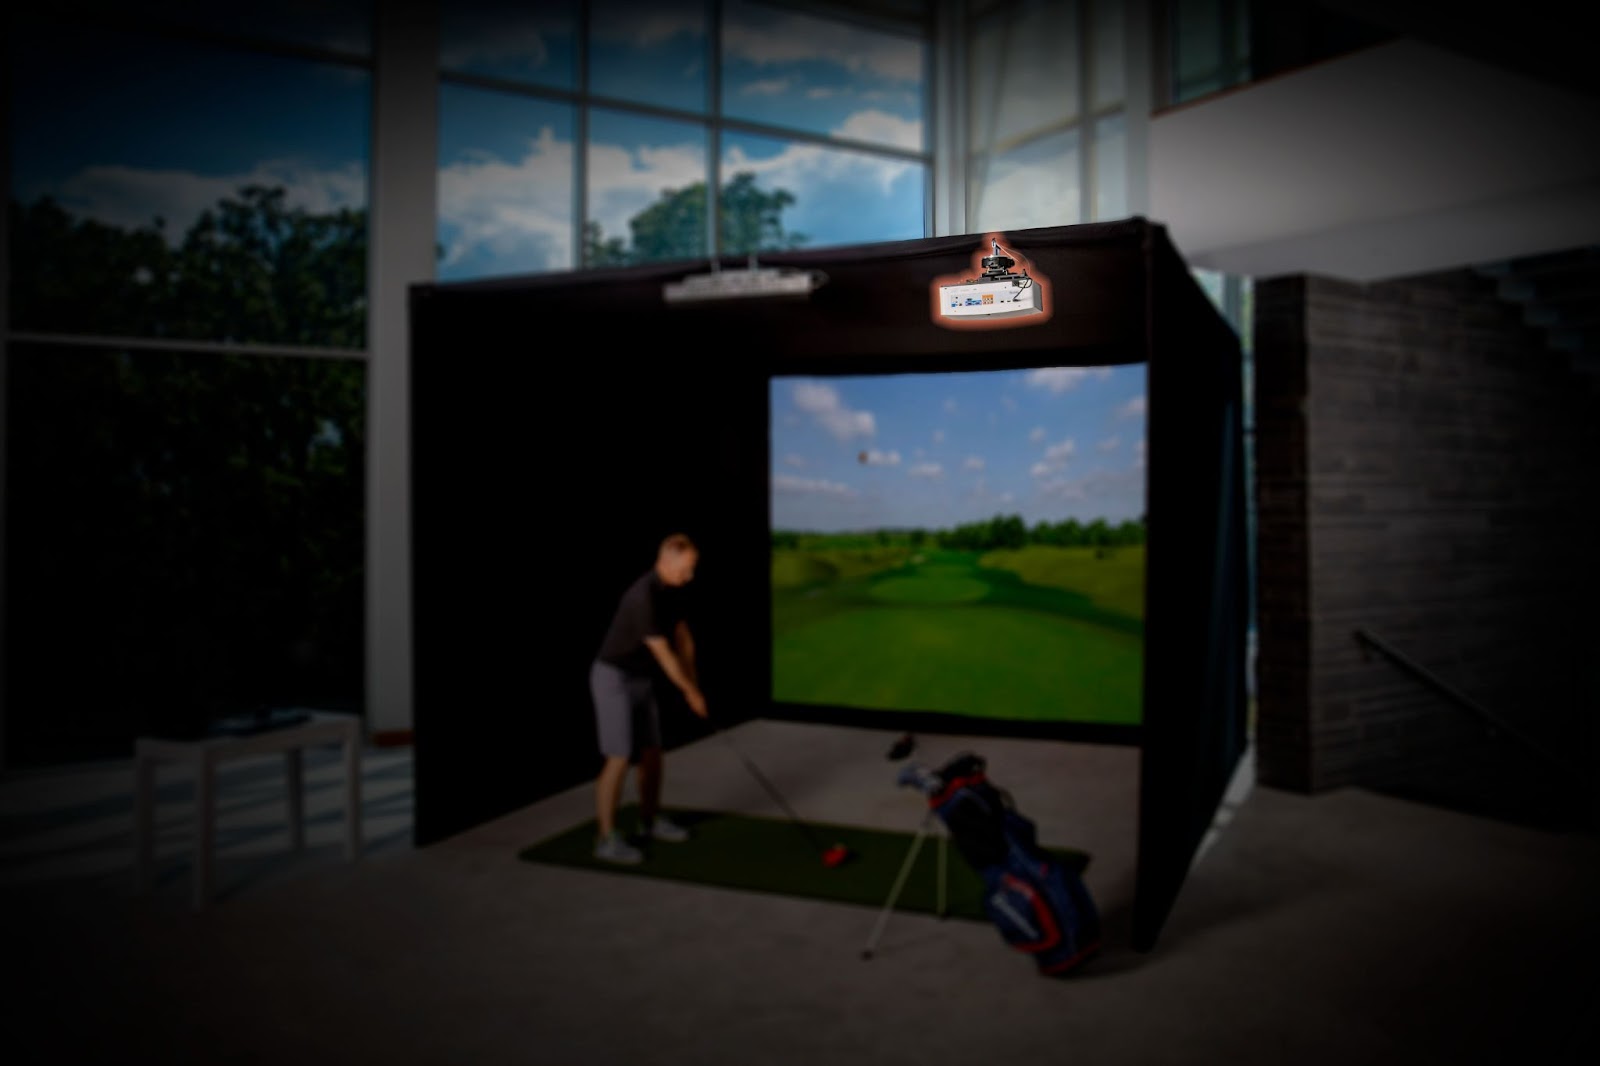 BenQ Golf Simulator Projector mounted overhead in Carl's Place golf enclosure